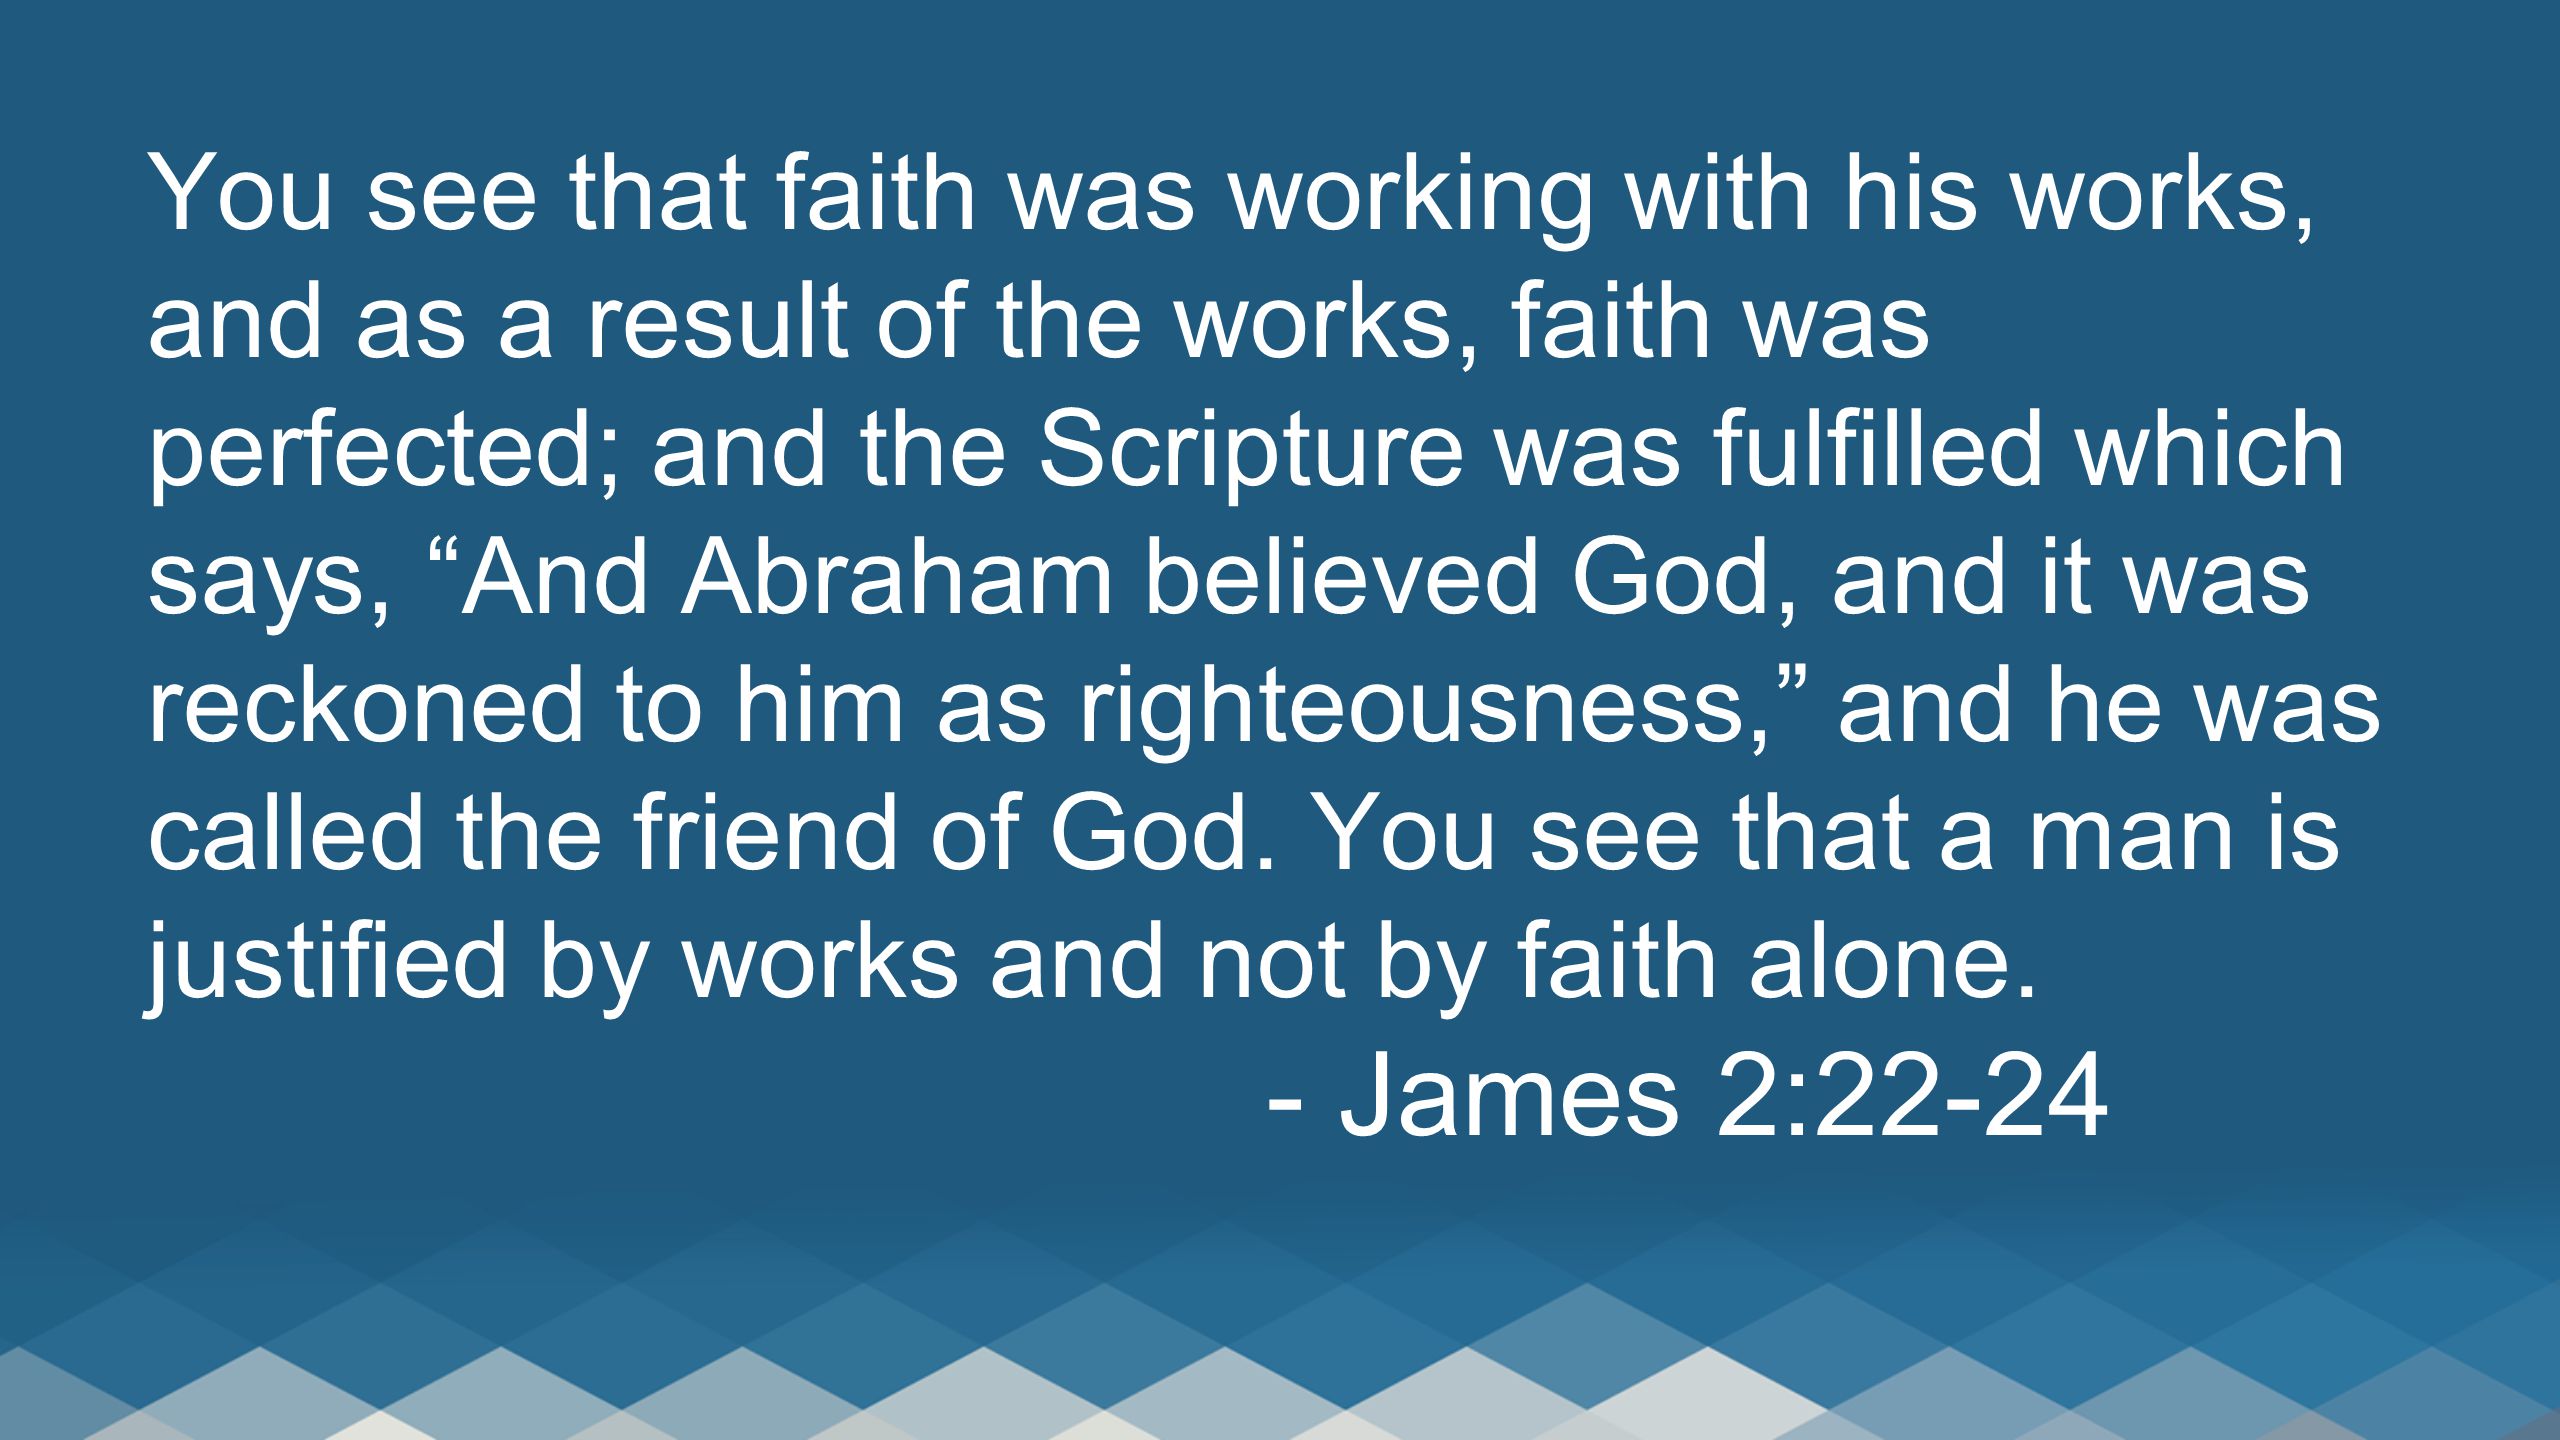 You see that faith was working with his works, and as a result of the works, faith was perfected; and the Scripture was fulfilled which says, And Abraham believed God, and it was reckoned to him as righteousness, and he was called the friend of God.